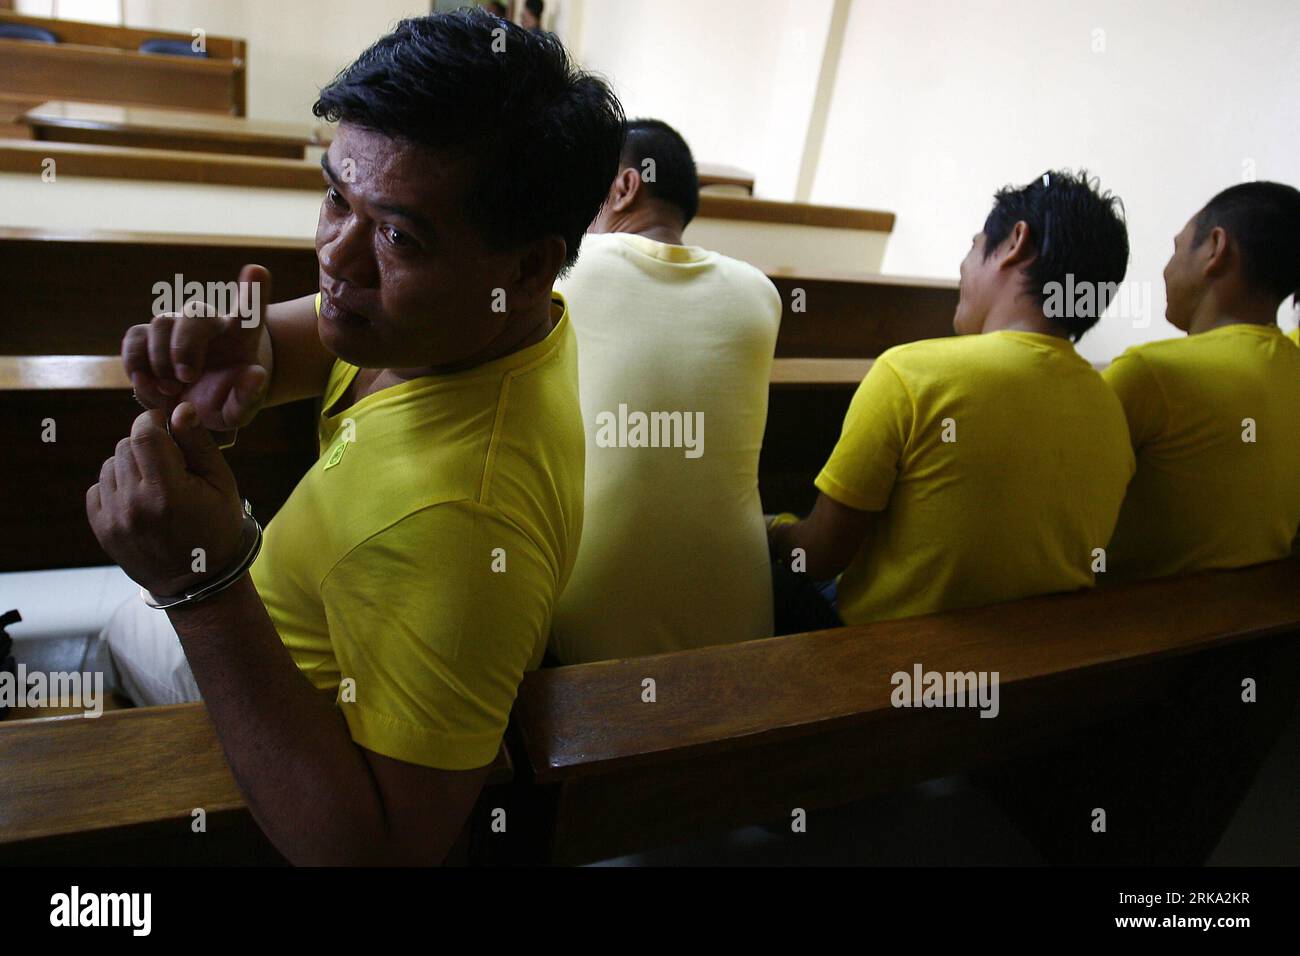 Bildnummer: 54259589  Datum: 28.07.2010  Copyright: imago/Xinhua (100728) -- MANILA, July 28, 2010 (Xinhua) -- One of the suspects shows his handcuffs as he waits for the start of the arraignment of the Maguindanao massacre inside the prison in Taguig, the Philippines, July 28, 2010. Ampatuan Jr. and 17 other individuals pleaded not guilty to murder charges linked to the massacre of 57 in Maguindanao November 2009. (Xinhua/Rouelle Umali) (lyi) (3)PHILIPPINES-MASSACRE-TRIAL PUBLICATIONxNOTxINxCHN Gesellschaft Manila Prozess kbdig xcb 2010 quer  o0 Massaker    Bildnummer 54259589 Date 28 07 2010 Stock Photo